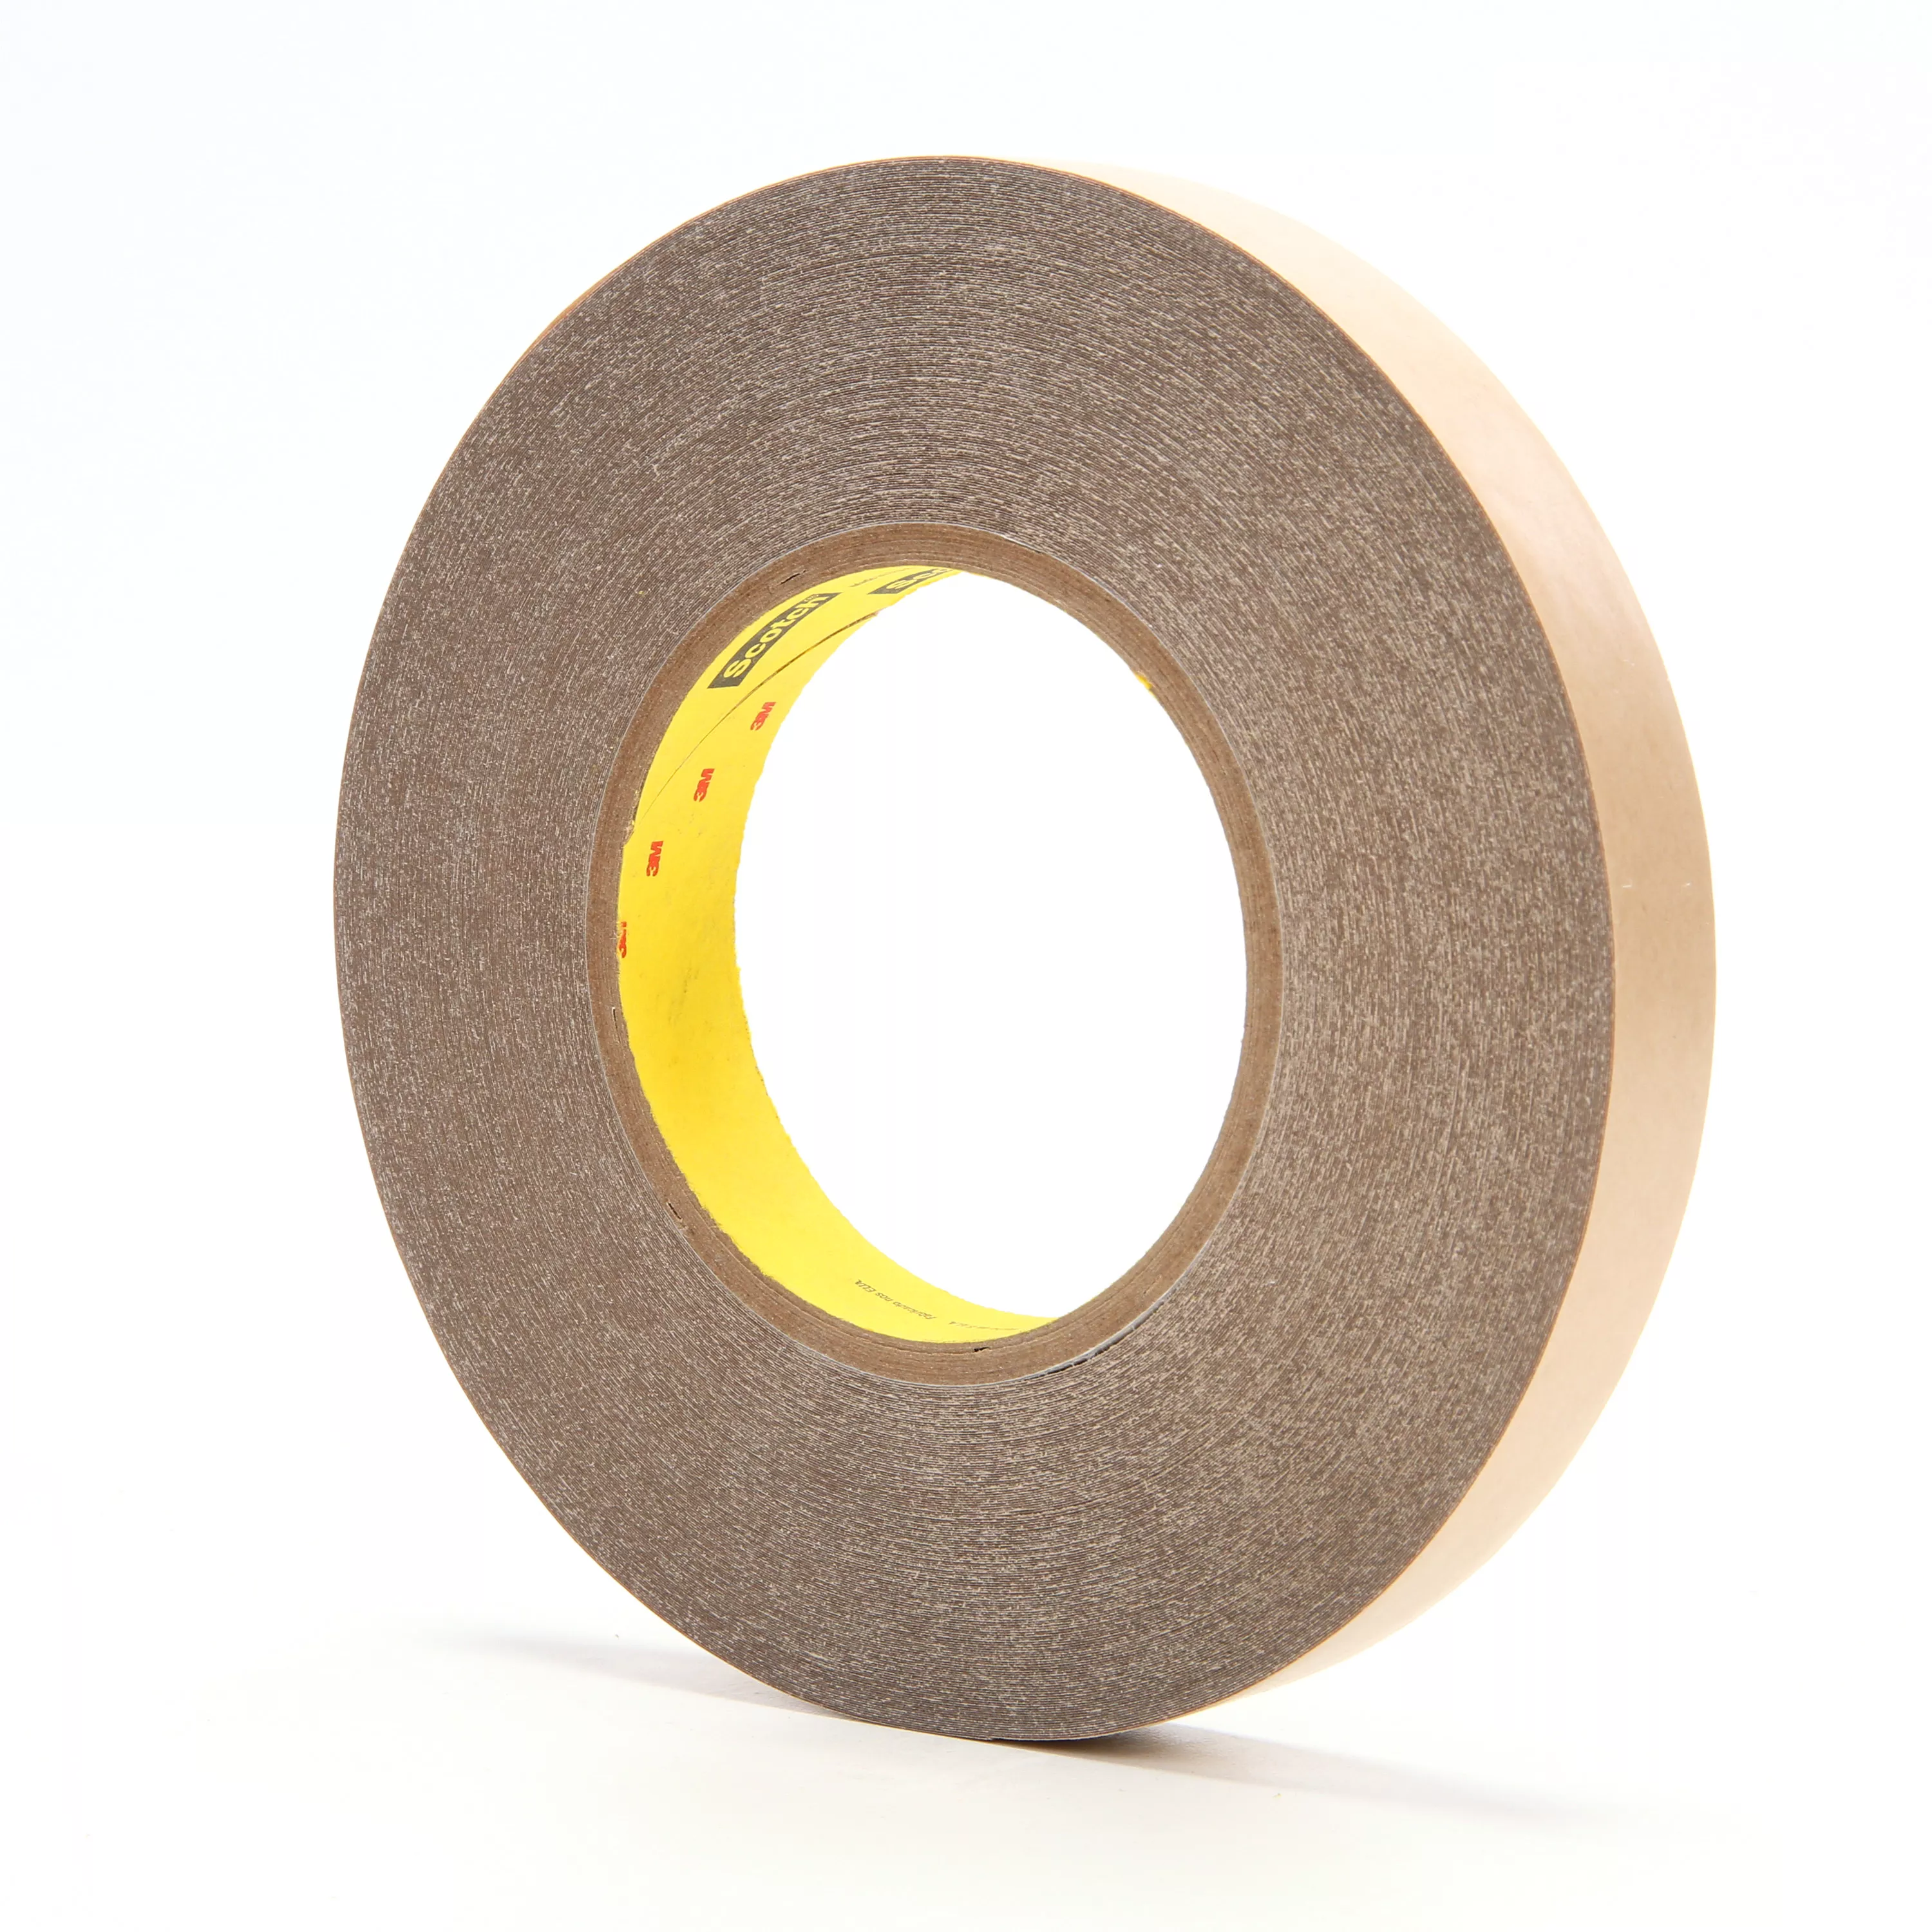 3M™ Adhesive Transfer Tape 9485PC, Clear, 3/4 in x 60 yd, 5 mil, 48
Roll/Case